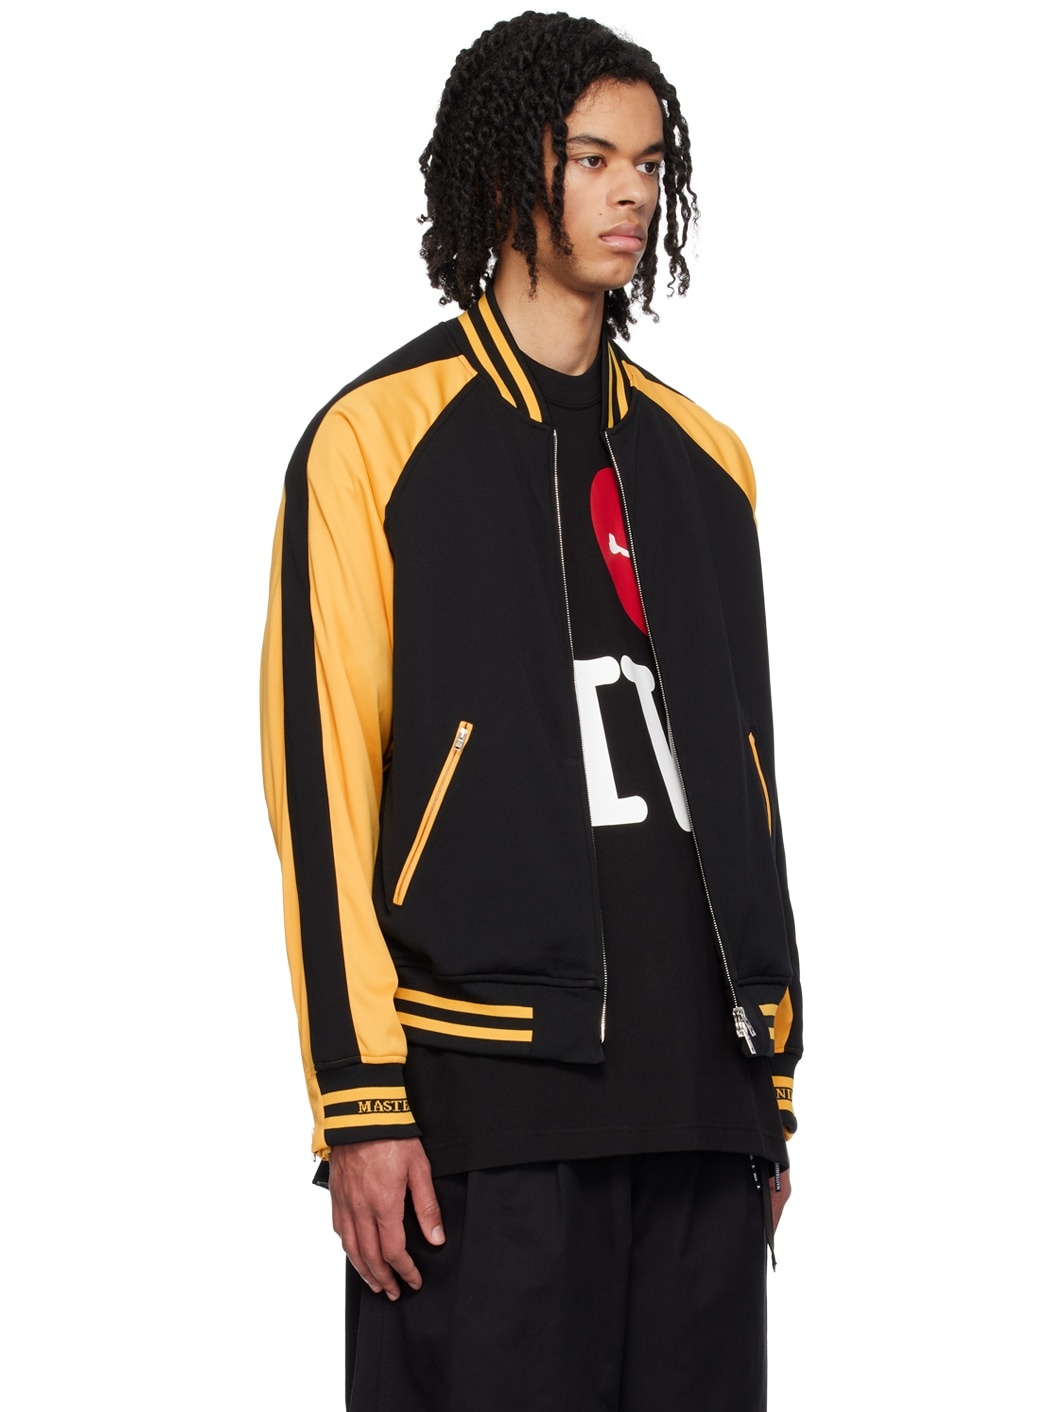 Black & Yellow Embroidered Bomber Jacket - 2